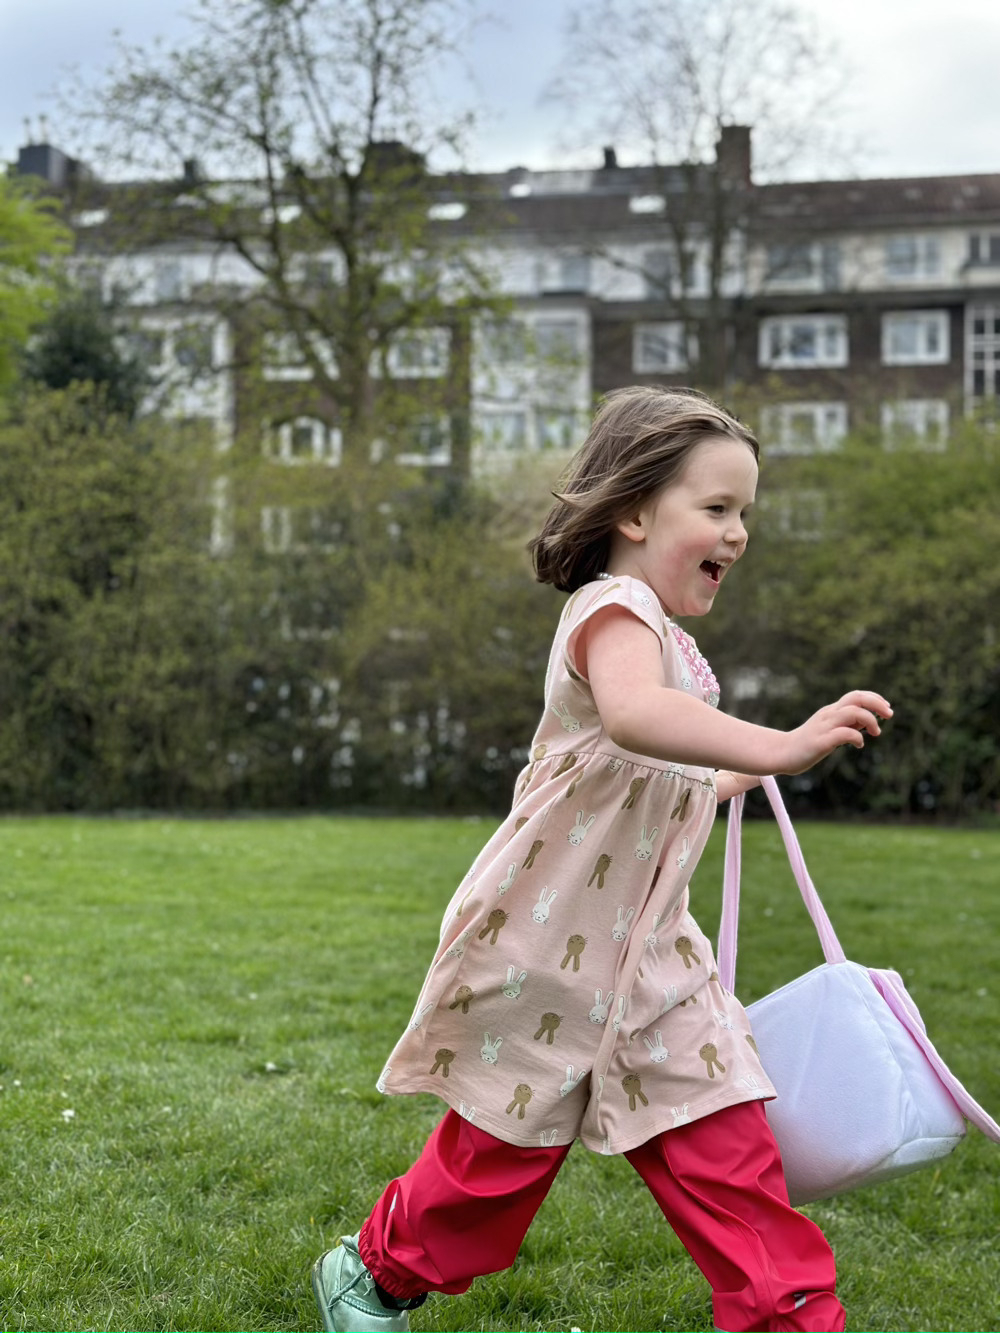 Little girl laughing while running through a park carrying an Easter basket hunting for eggs.